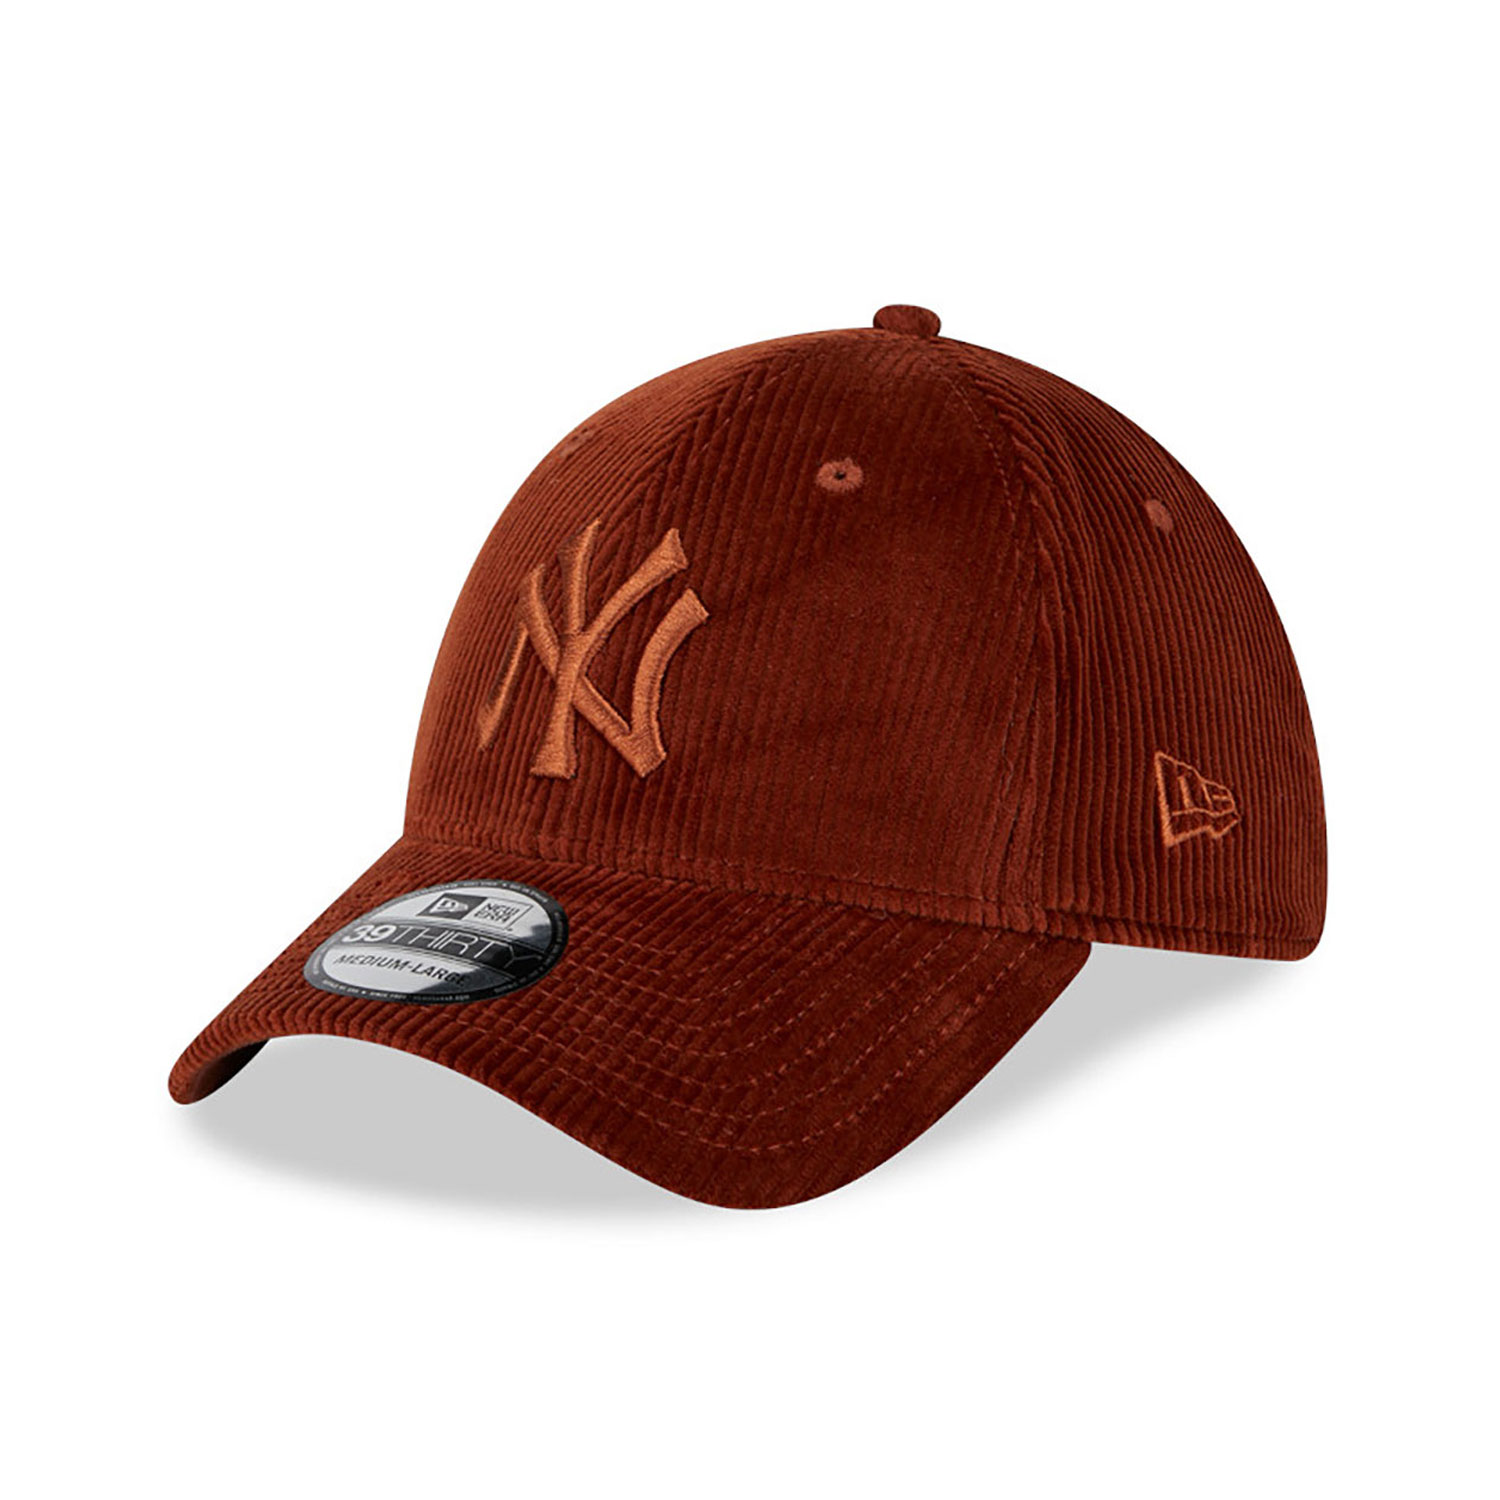 New York Yankees Wide Cord Brown 39THIRTY Stretch Fit Cap